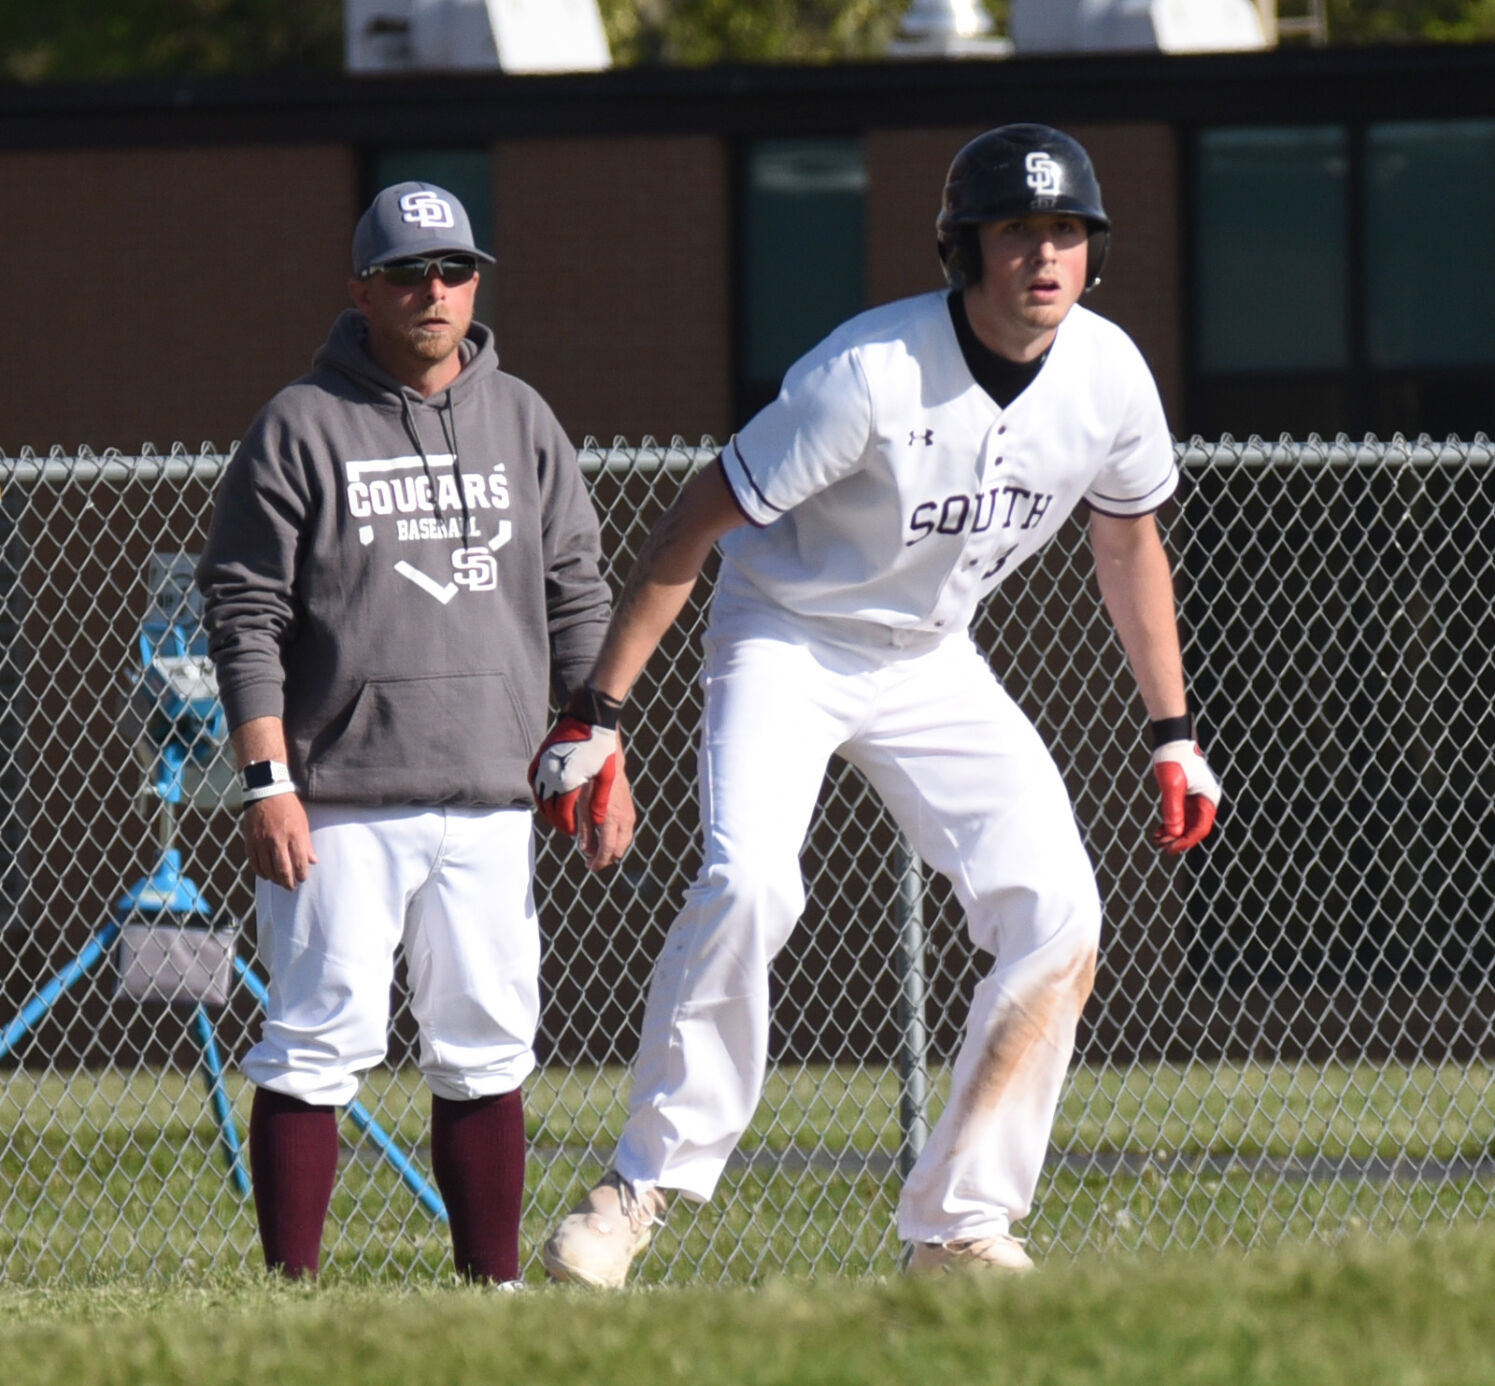 South Decatur Baseball Team Extends Win Streak to 10 Games with Dominant 11-1 Victory